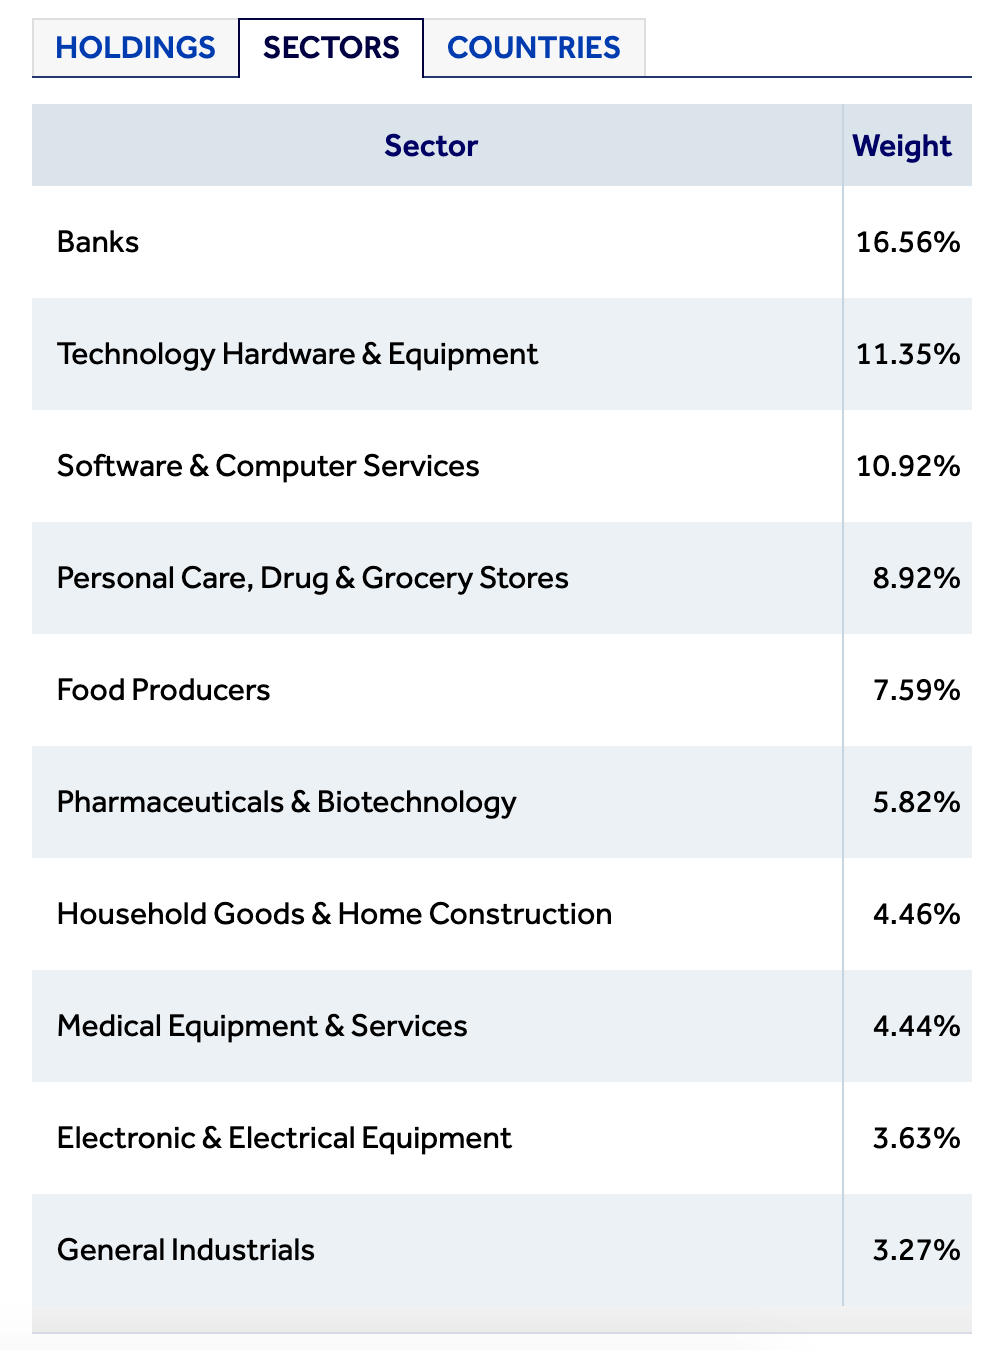 Table breakdown of the percentage weight of each sector